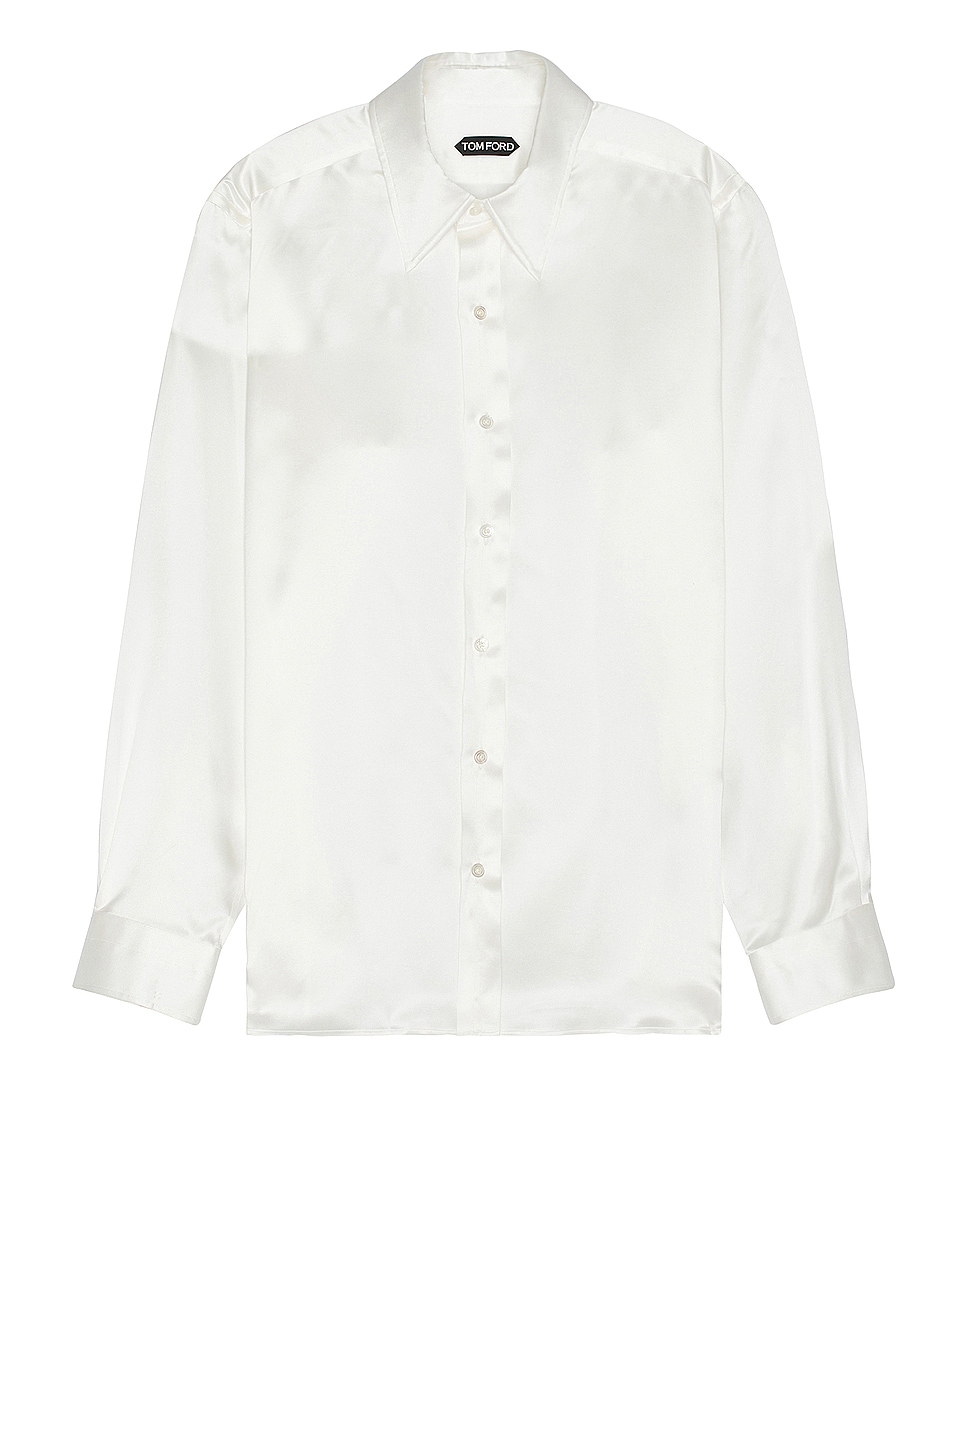 Image 1 of TOM FORD Silk Charmeuse Slim Fit Shirt in Silk White